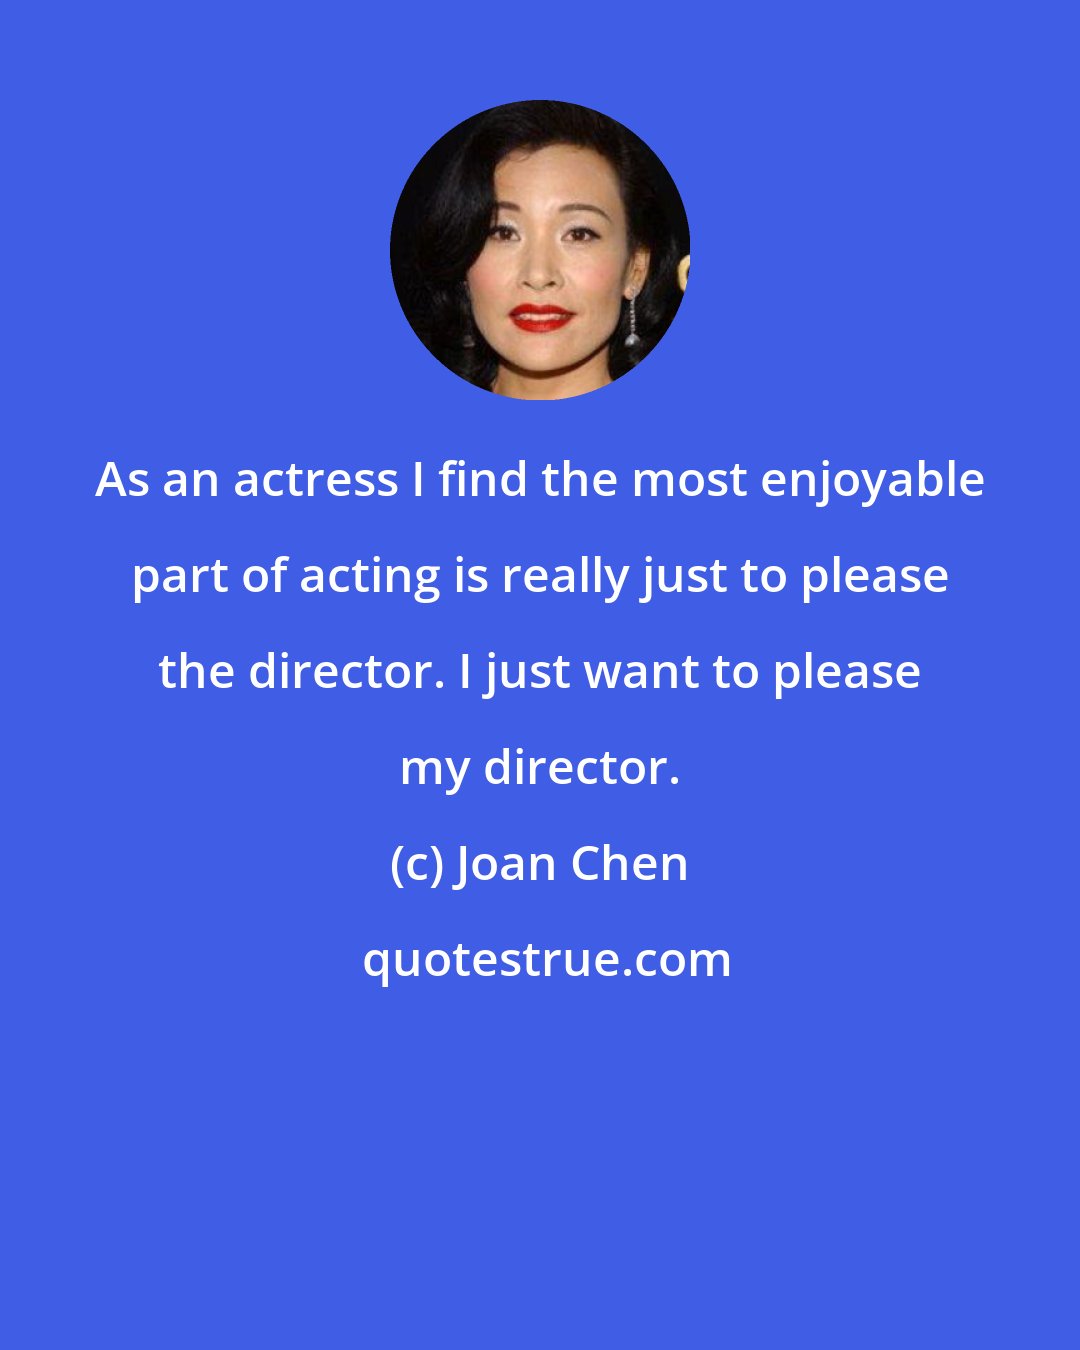 Joan Chen: As an actress I find the most enjoyable part of acting is really just to please the director. I just want to please my director.